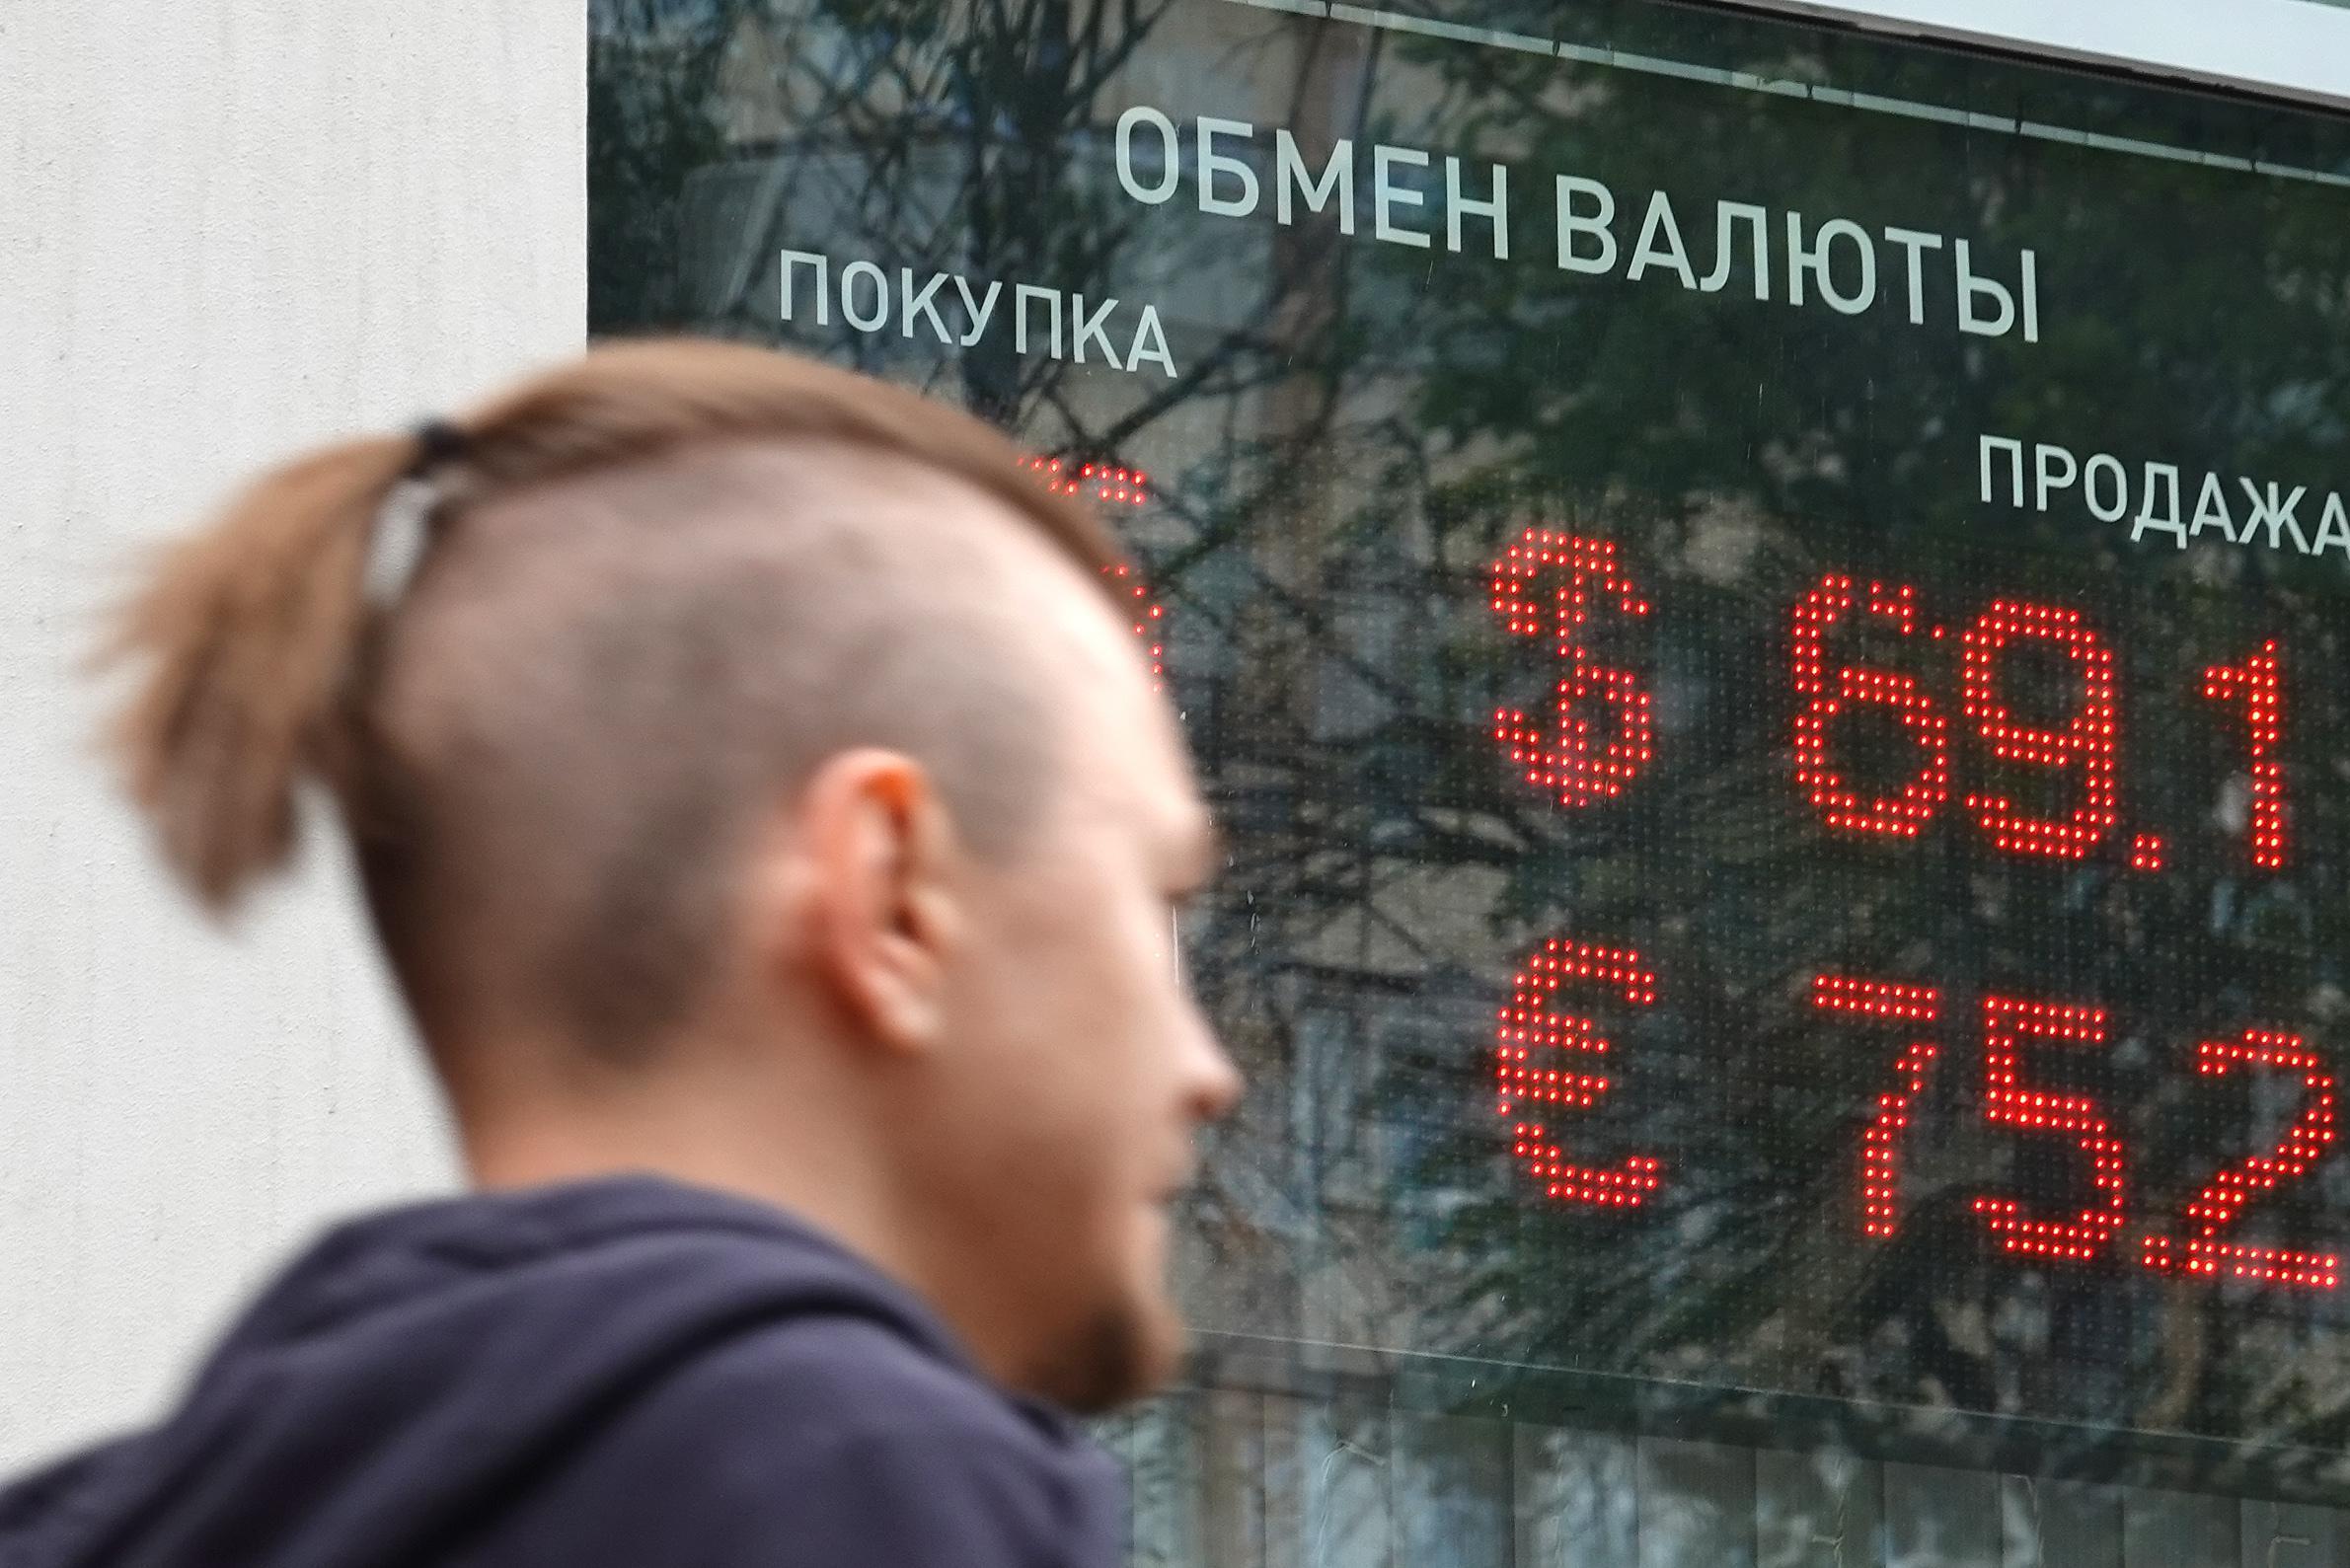 Russian ruble rises to highest level in seven years: how is that possible?  And what does that mean for energy prices here?